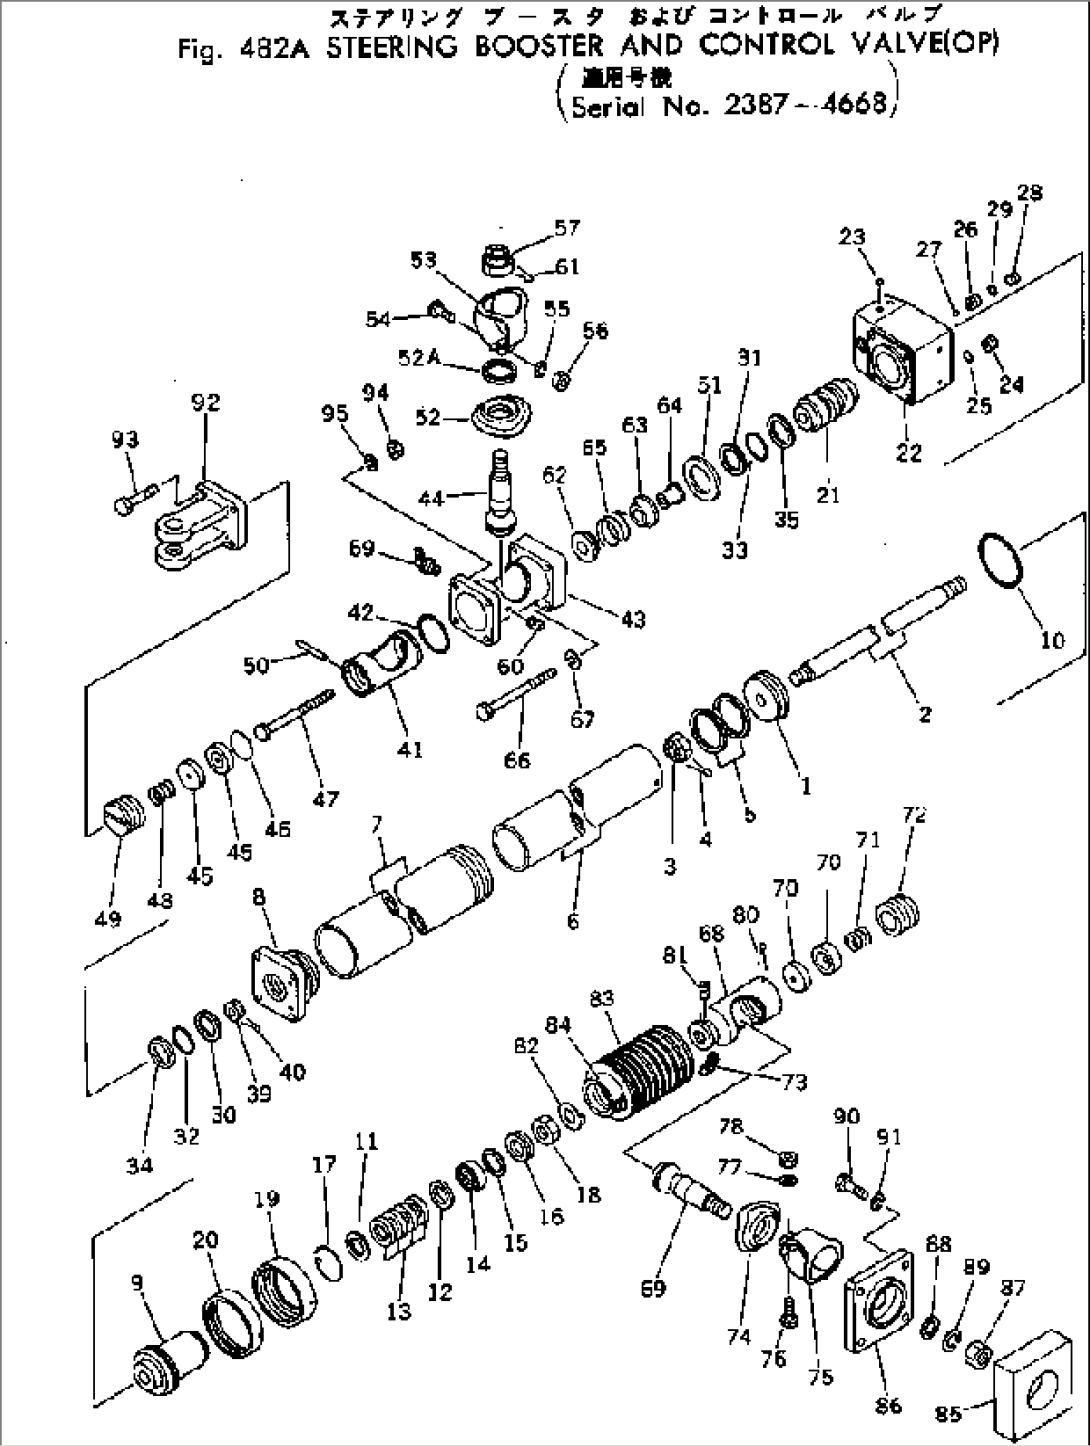 STEERING BOOSTER AND CONTROL VALVE (OP)(#2387-4668)